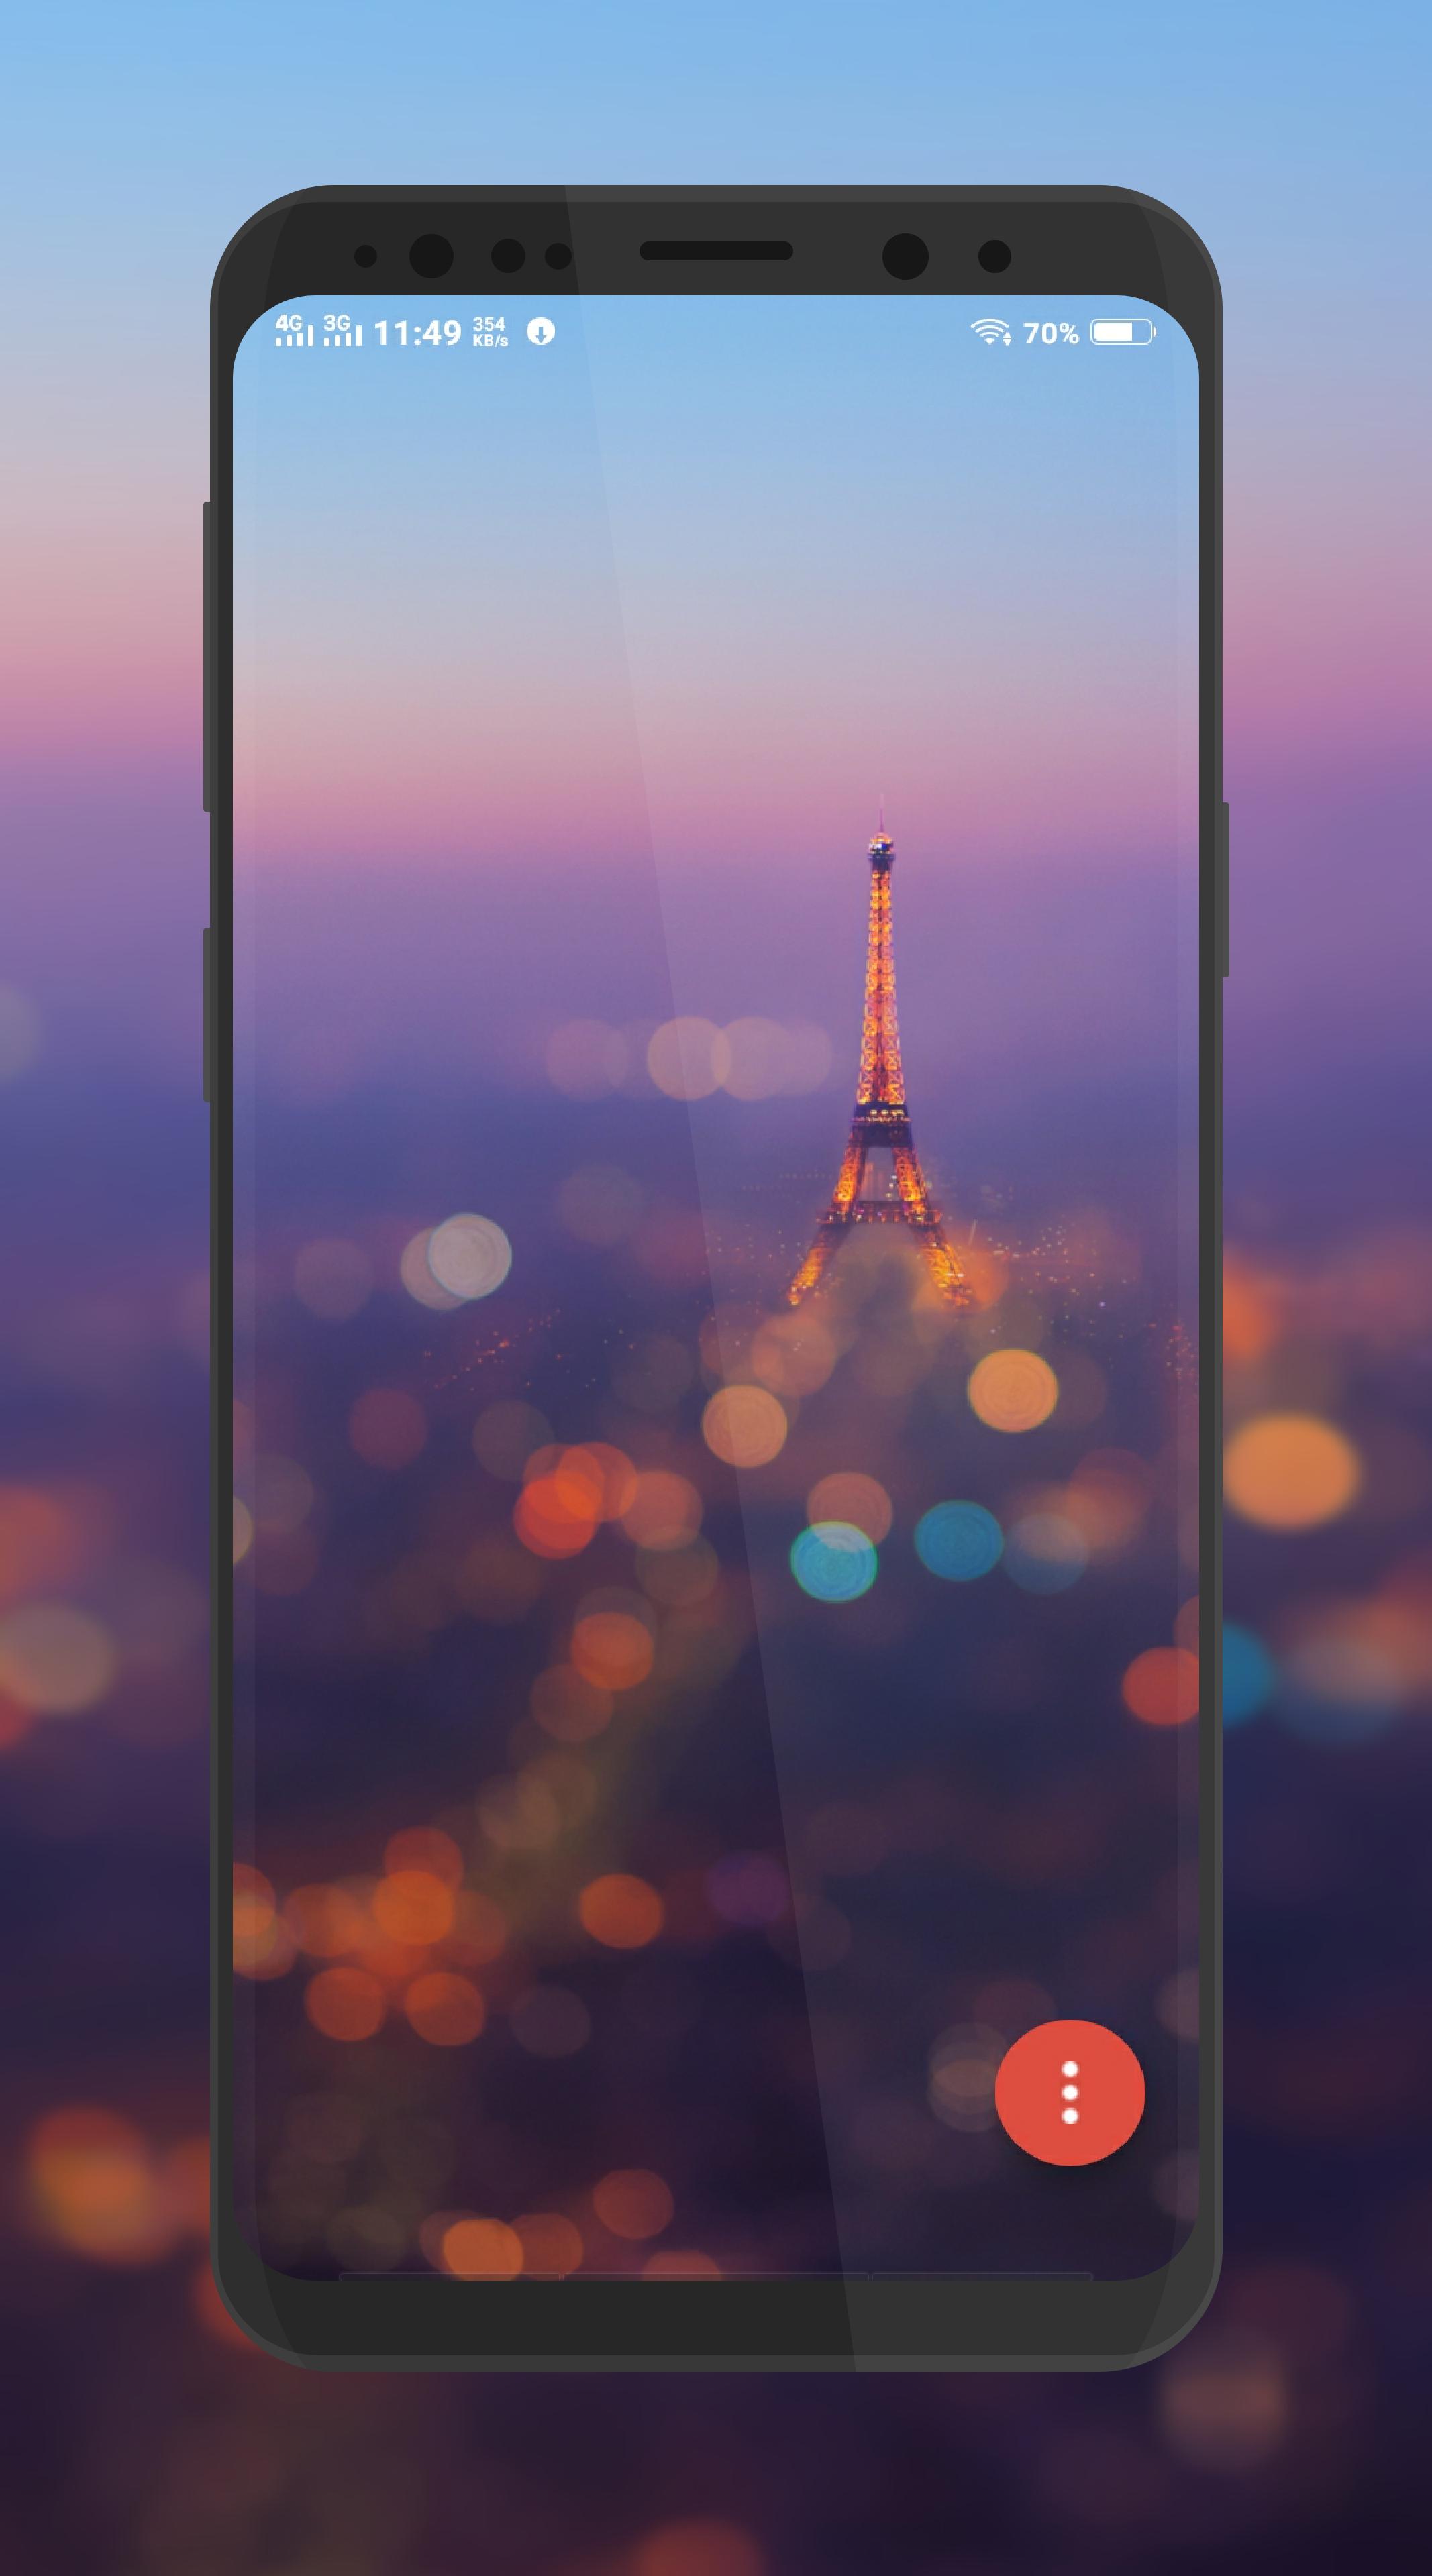 Huawei P P Lite And P10 Wallpapers Hd For Android Apk Download